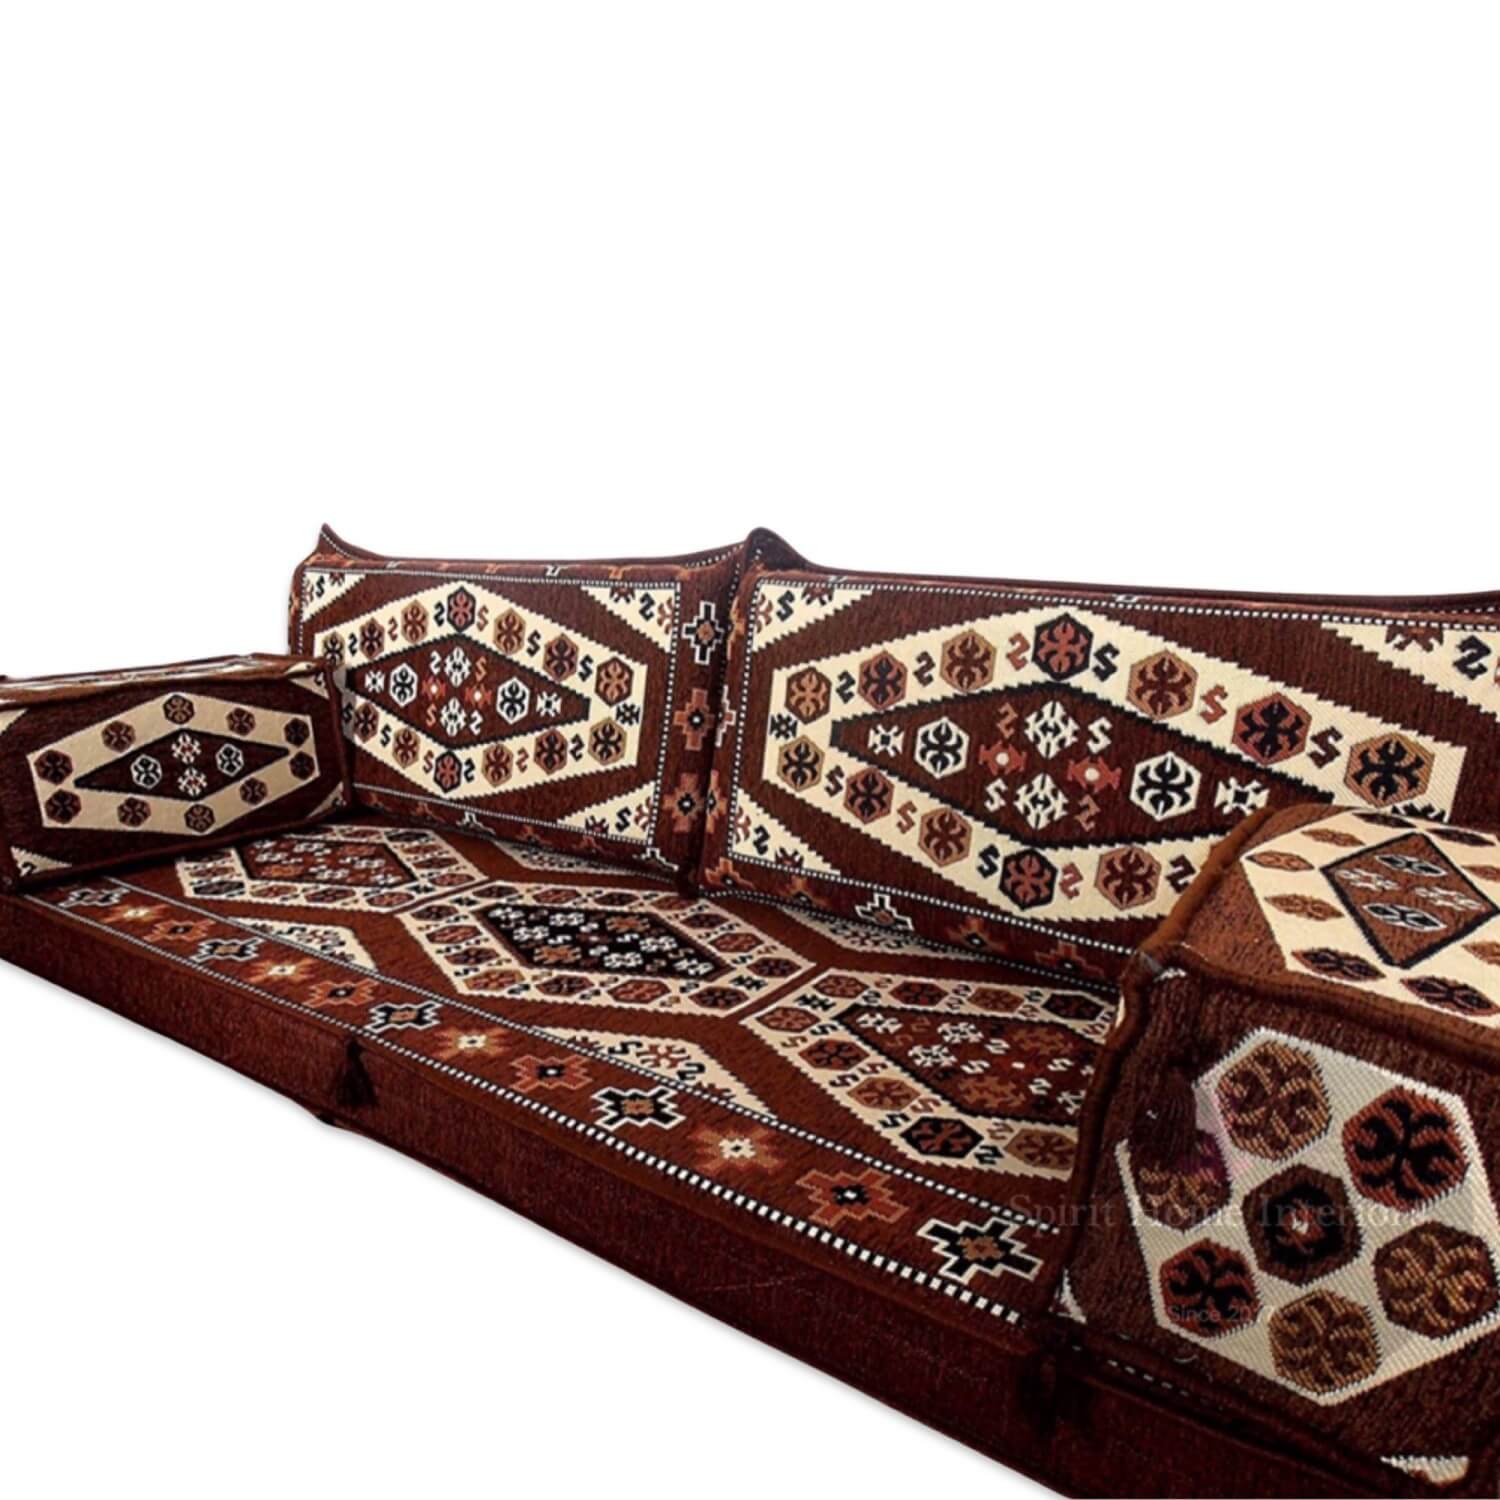 Nomad Brown Three Seater Majlis Floor Sofa Couch